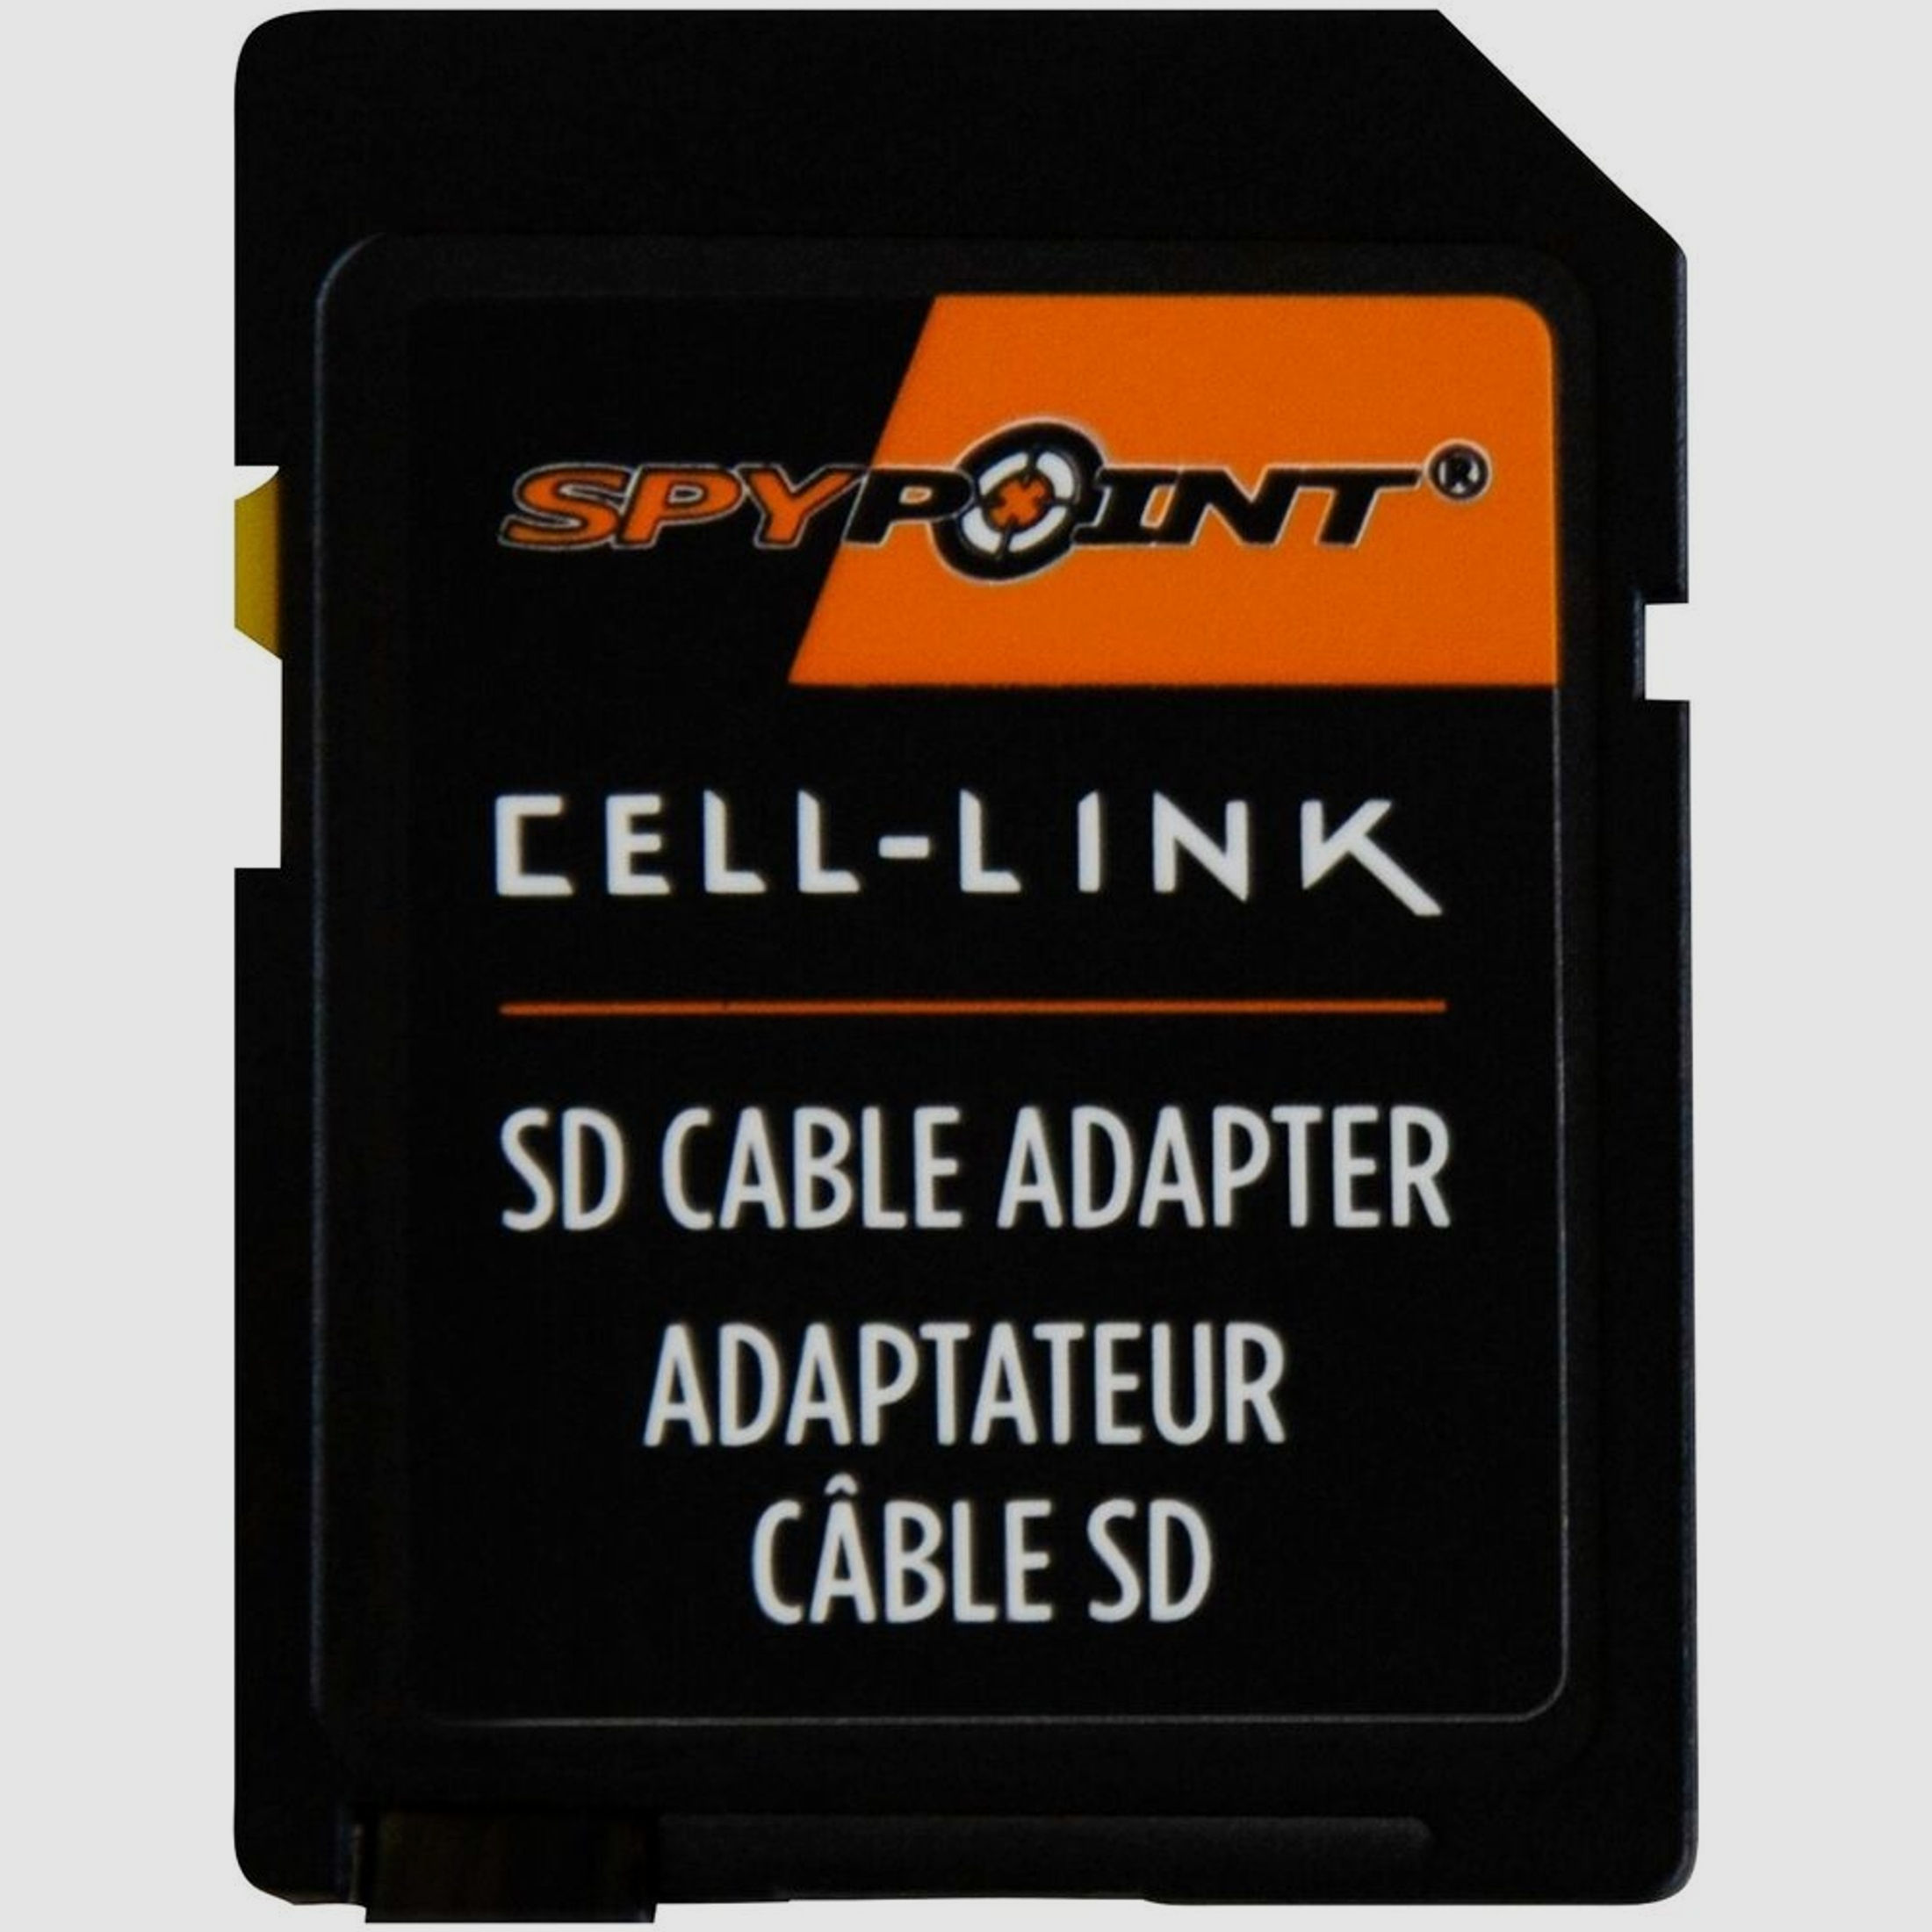 Spypoint	 Mobilfunkadapter Cell Link